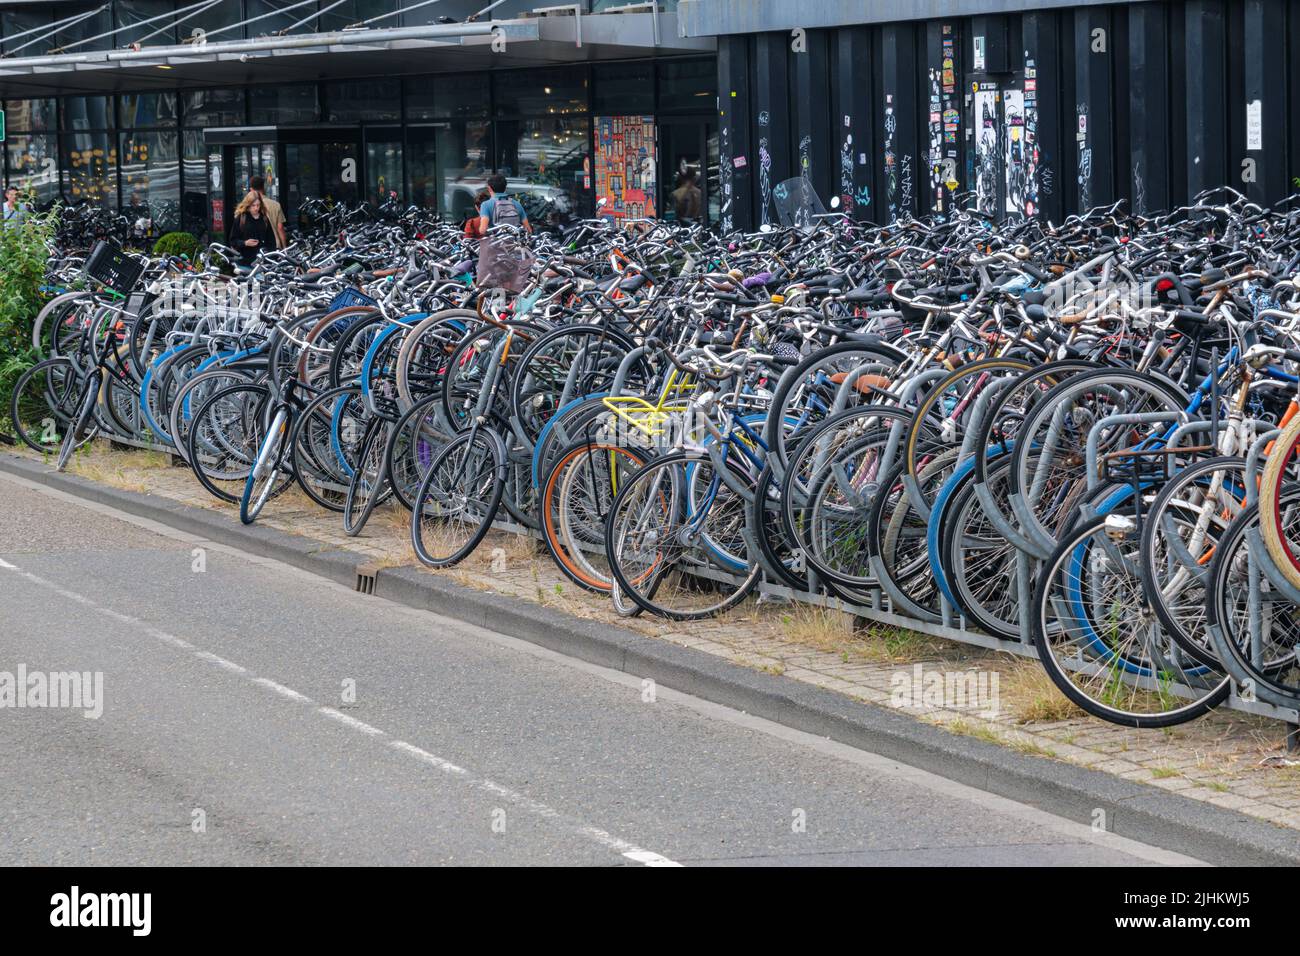 Amsterdam, Netherlands - 21 June 2022: Bicycle Parking Central Station has around 10,000 temporary bike parking spaces Stock Photo